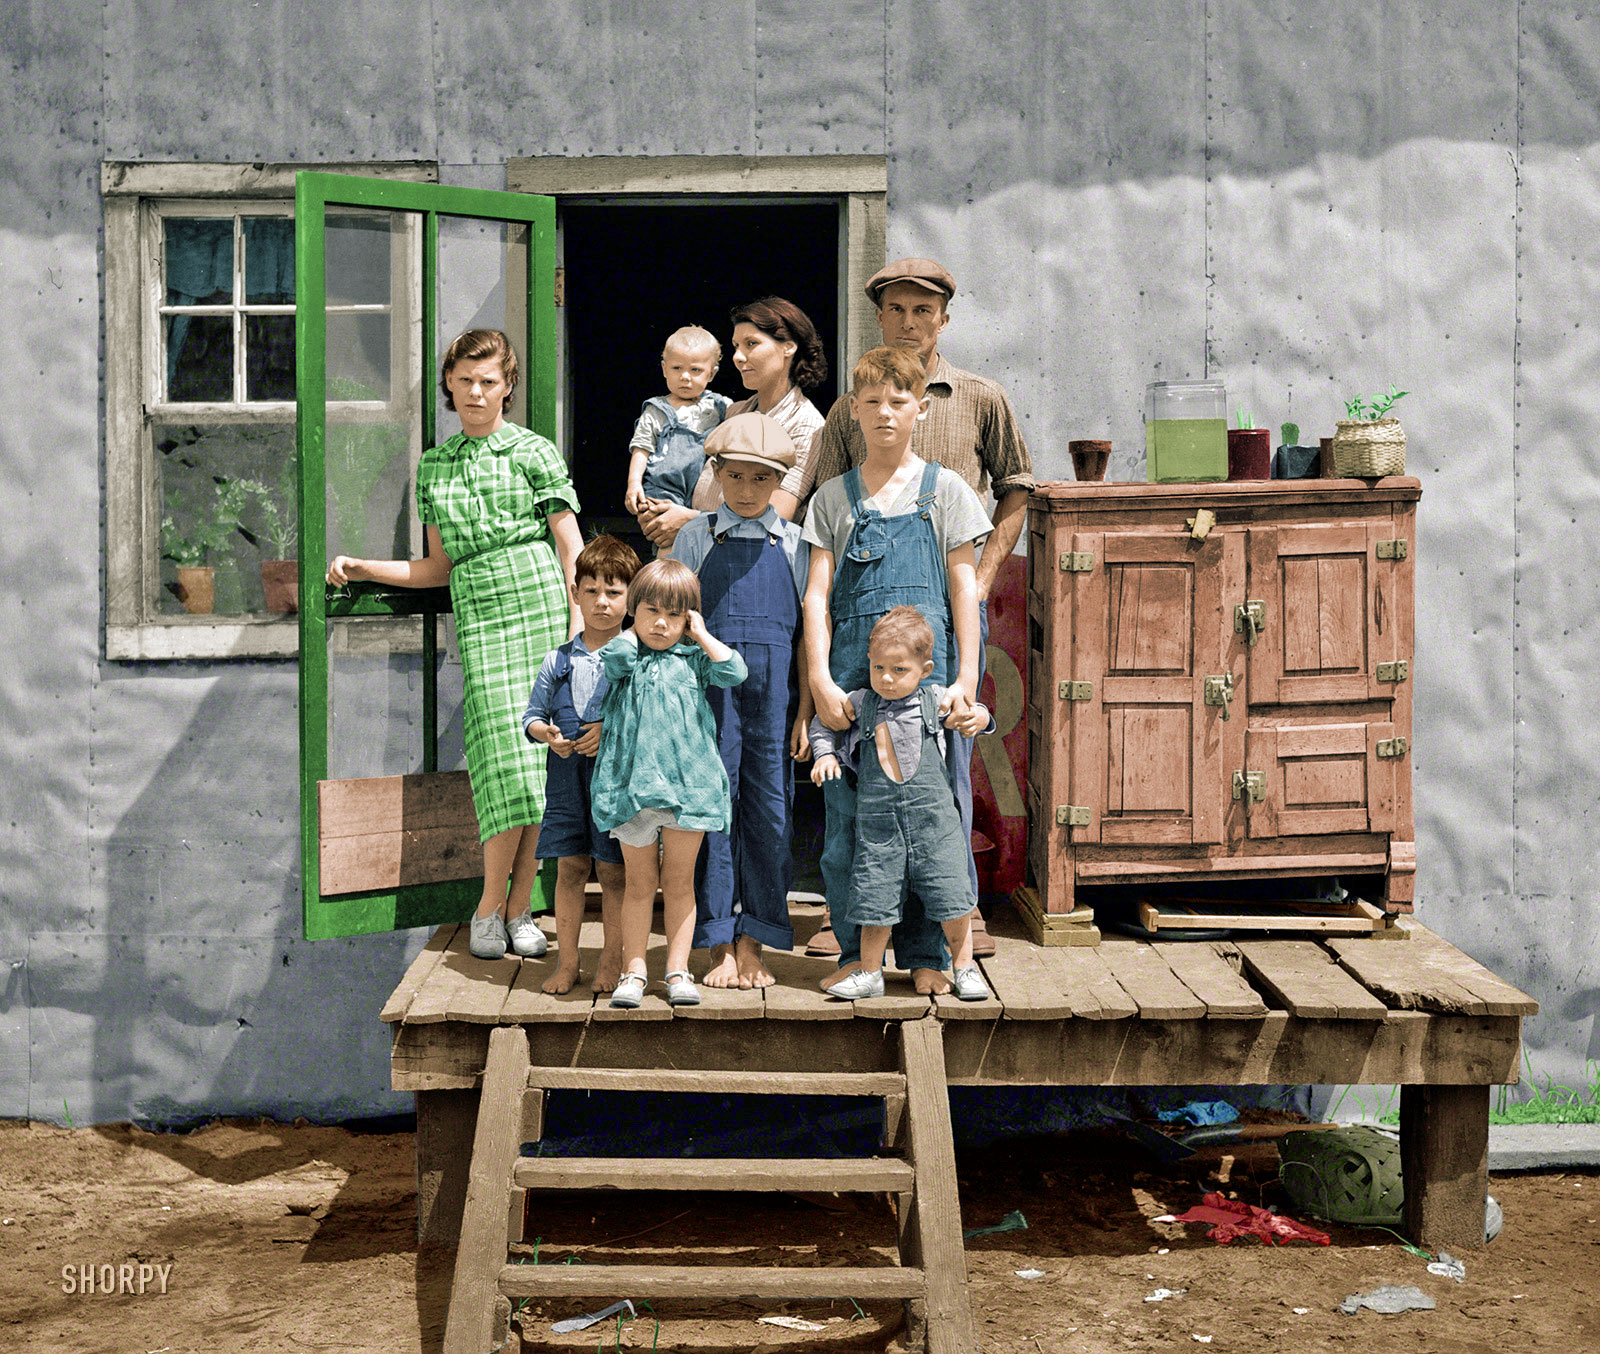 I thought this hardscrabble family could use a little color in their lives. Colorized from this Shorpy original. View full size.